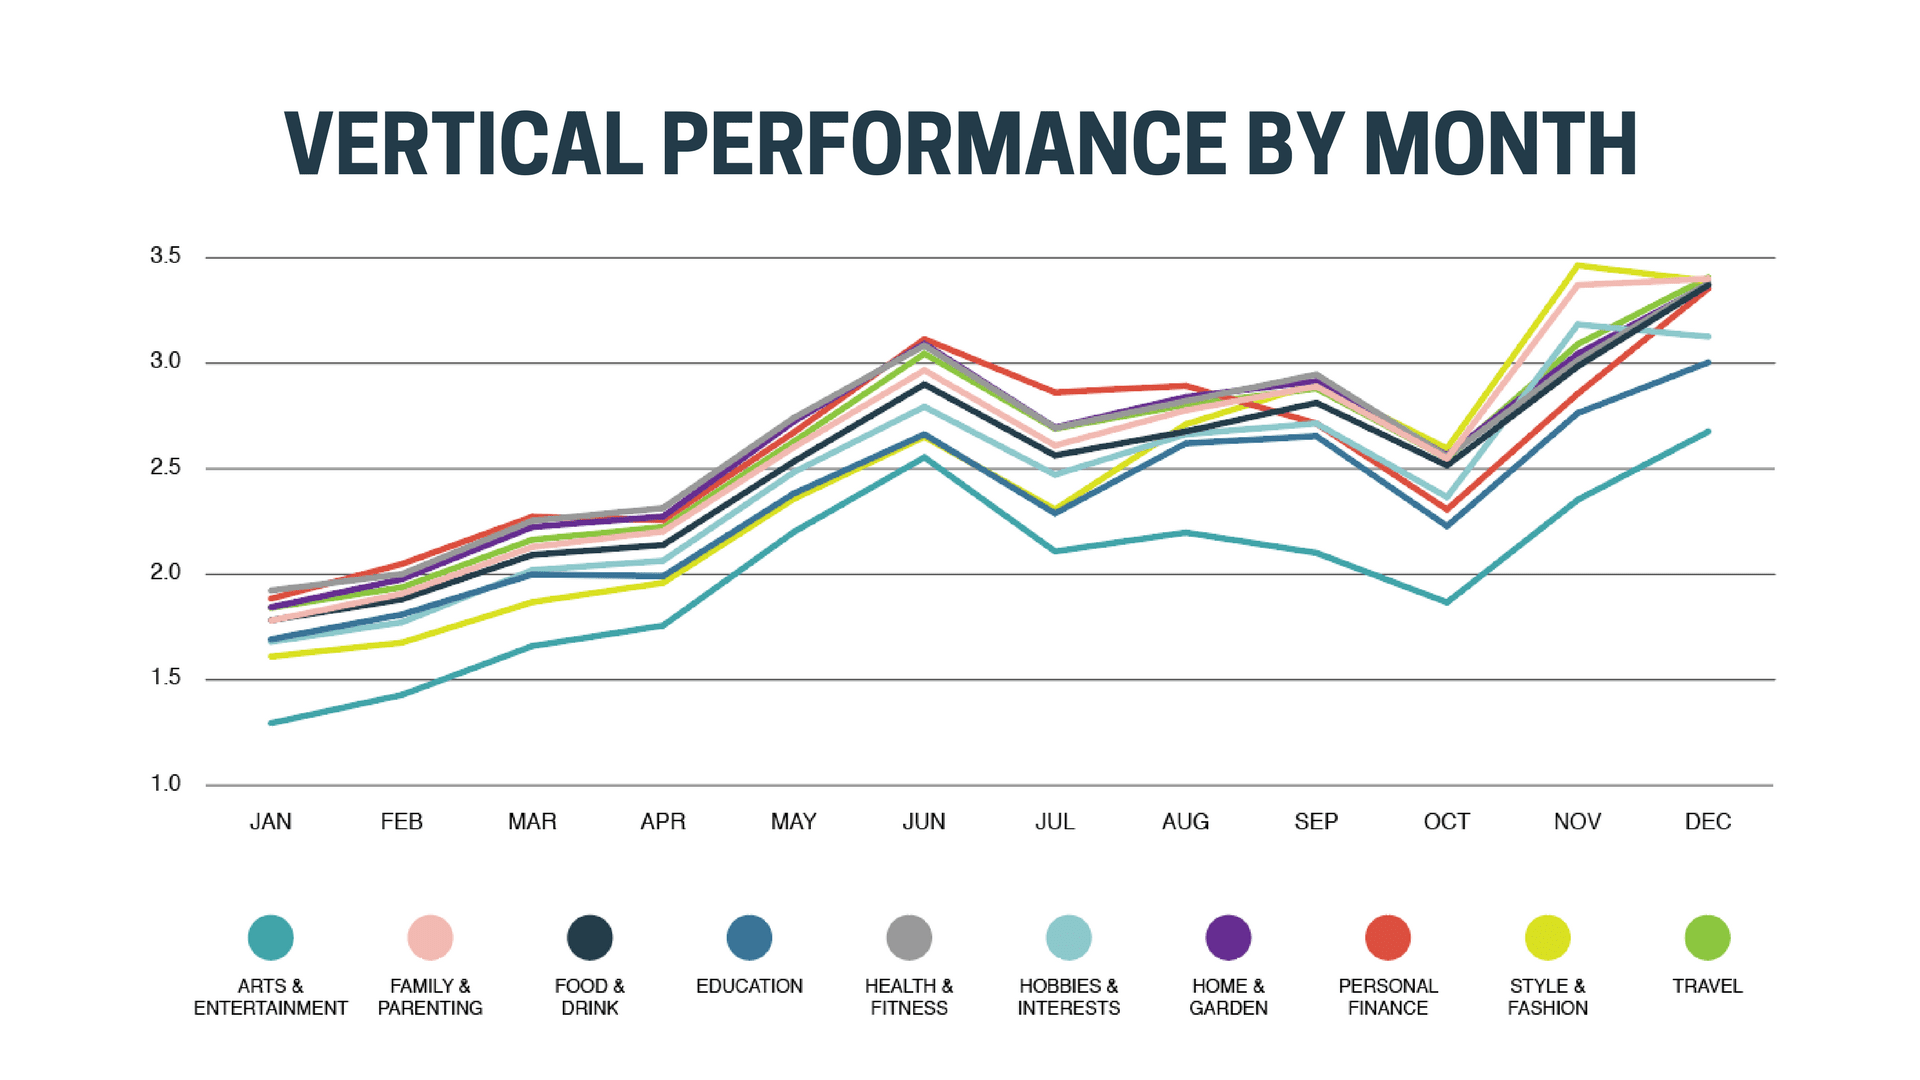 Vertical performance by month graph, with upward trend.